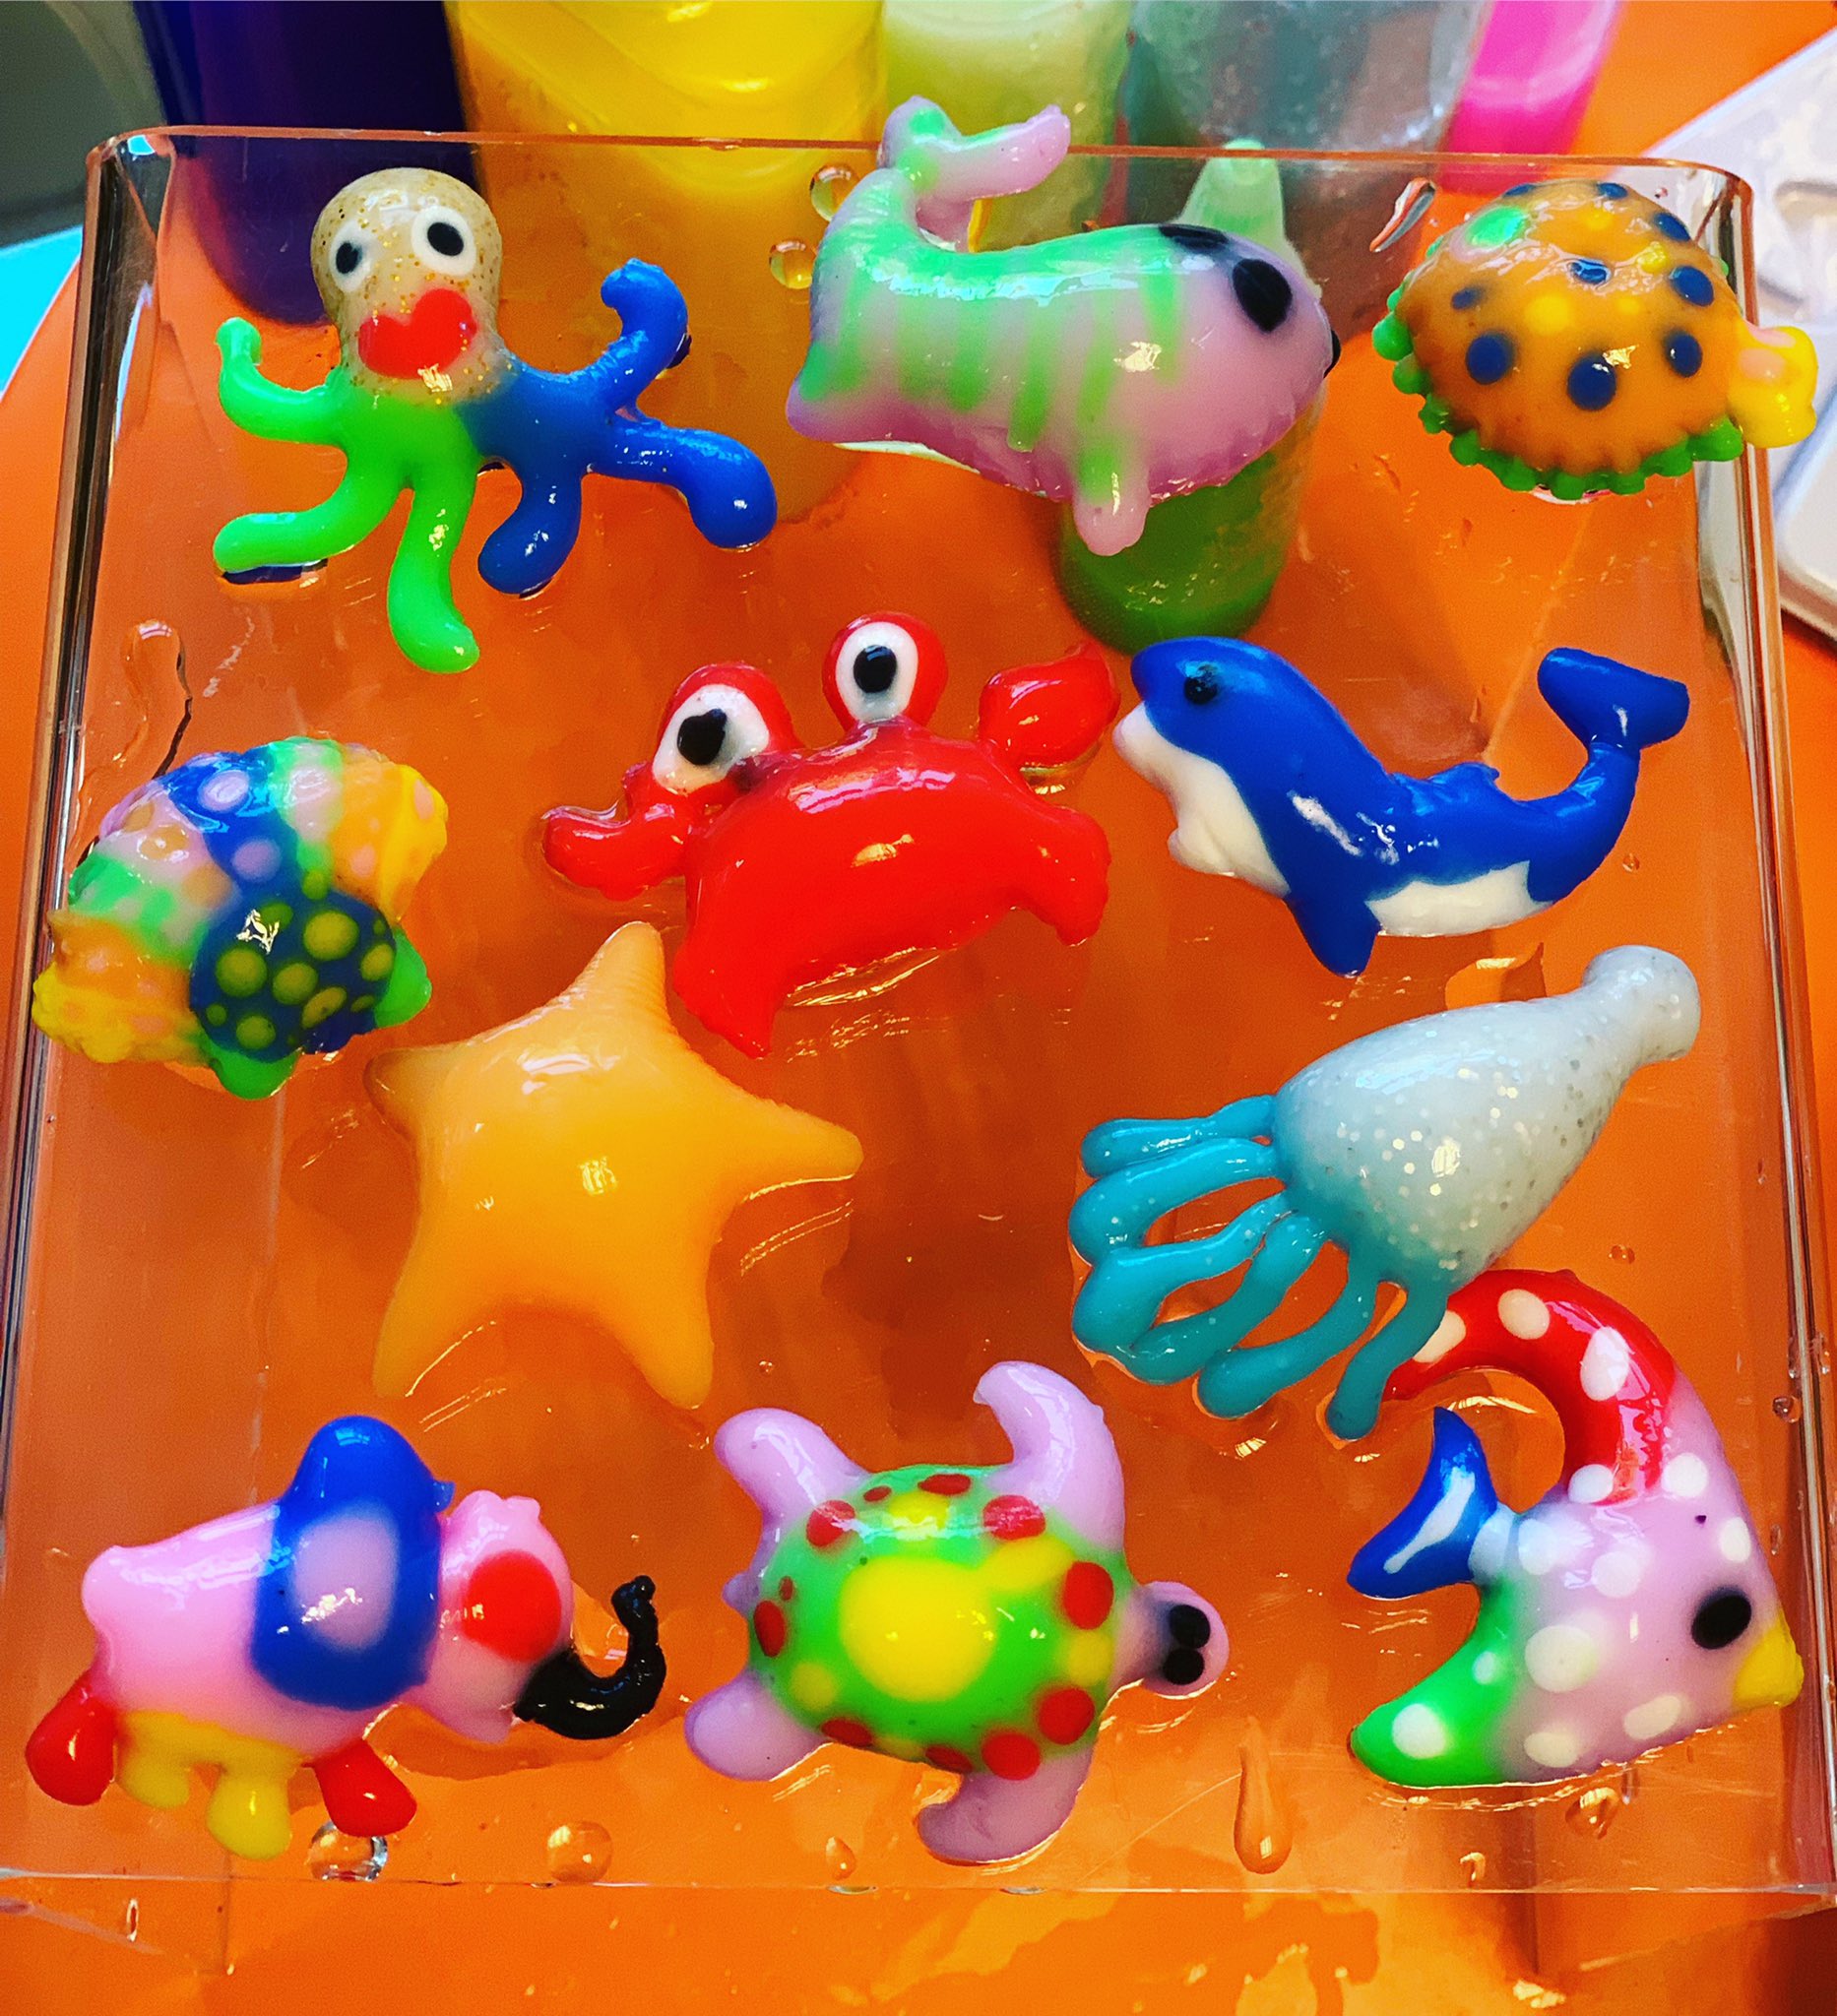 Recreation Toys on X: What do you think about our Aqua Gelz collection?  What toy collections do you have? 🐢🐡🐙🐬🦑🐚 #toys #collection  #collectable #toysurprise #surprise #creative #imaginative #arts #crafts  #kidstoys #rainbow #colourful #